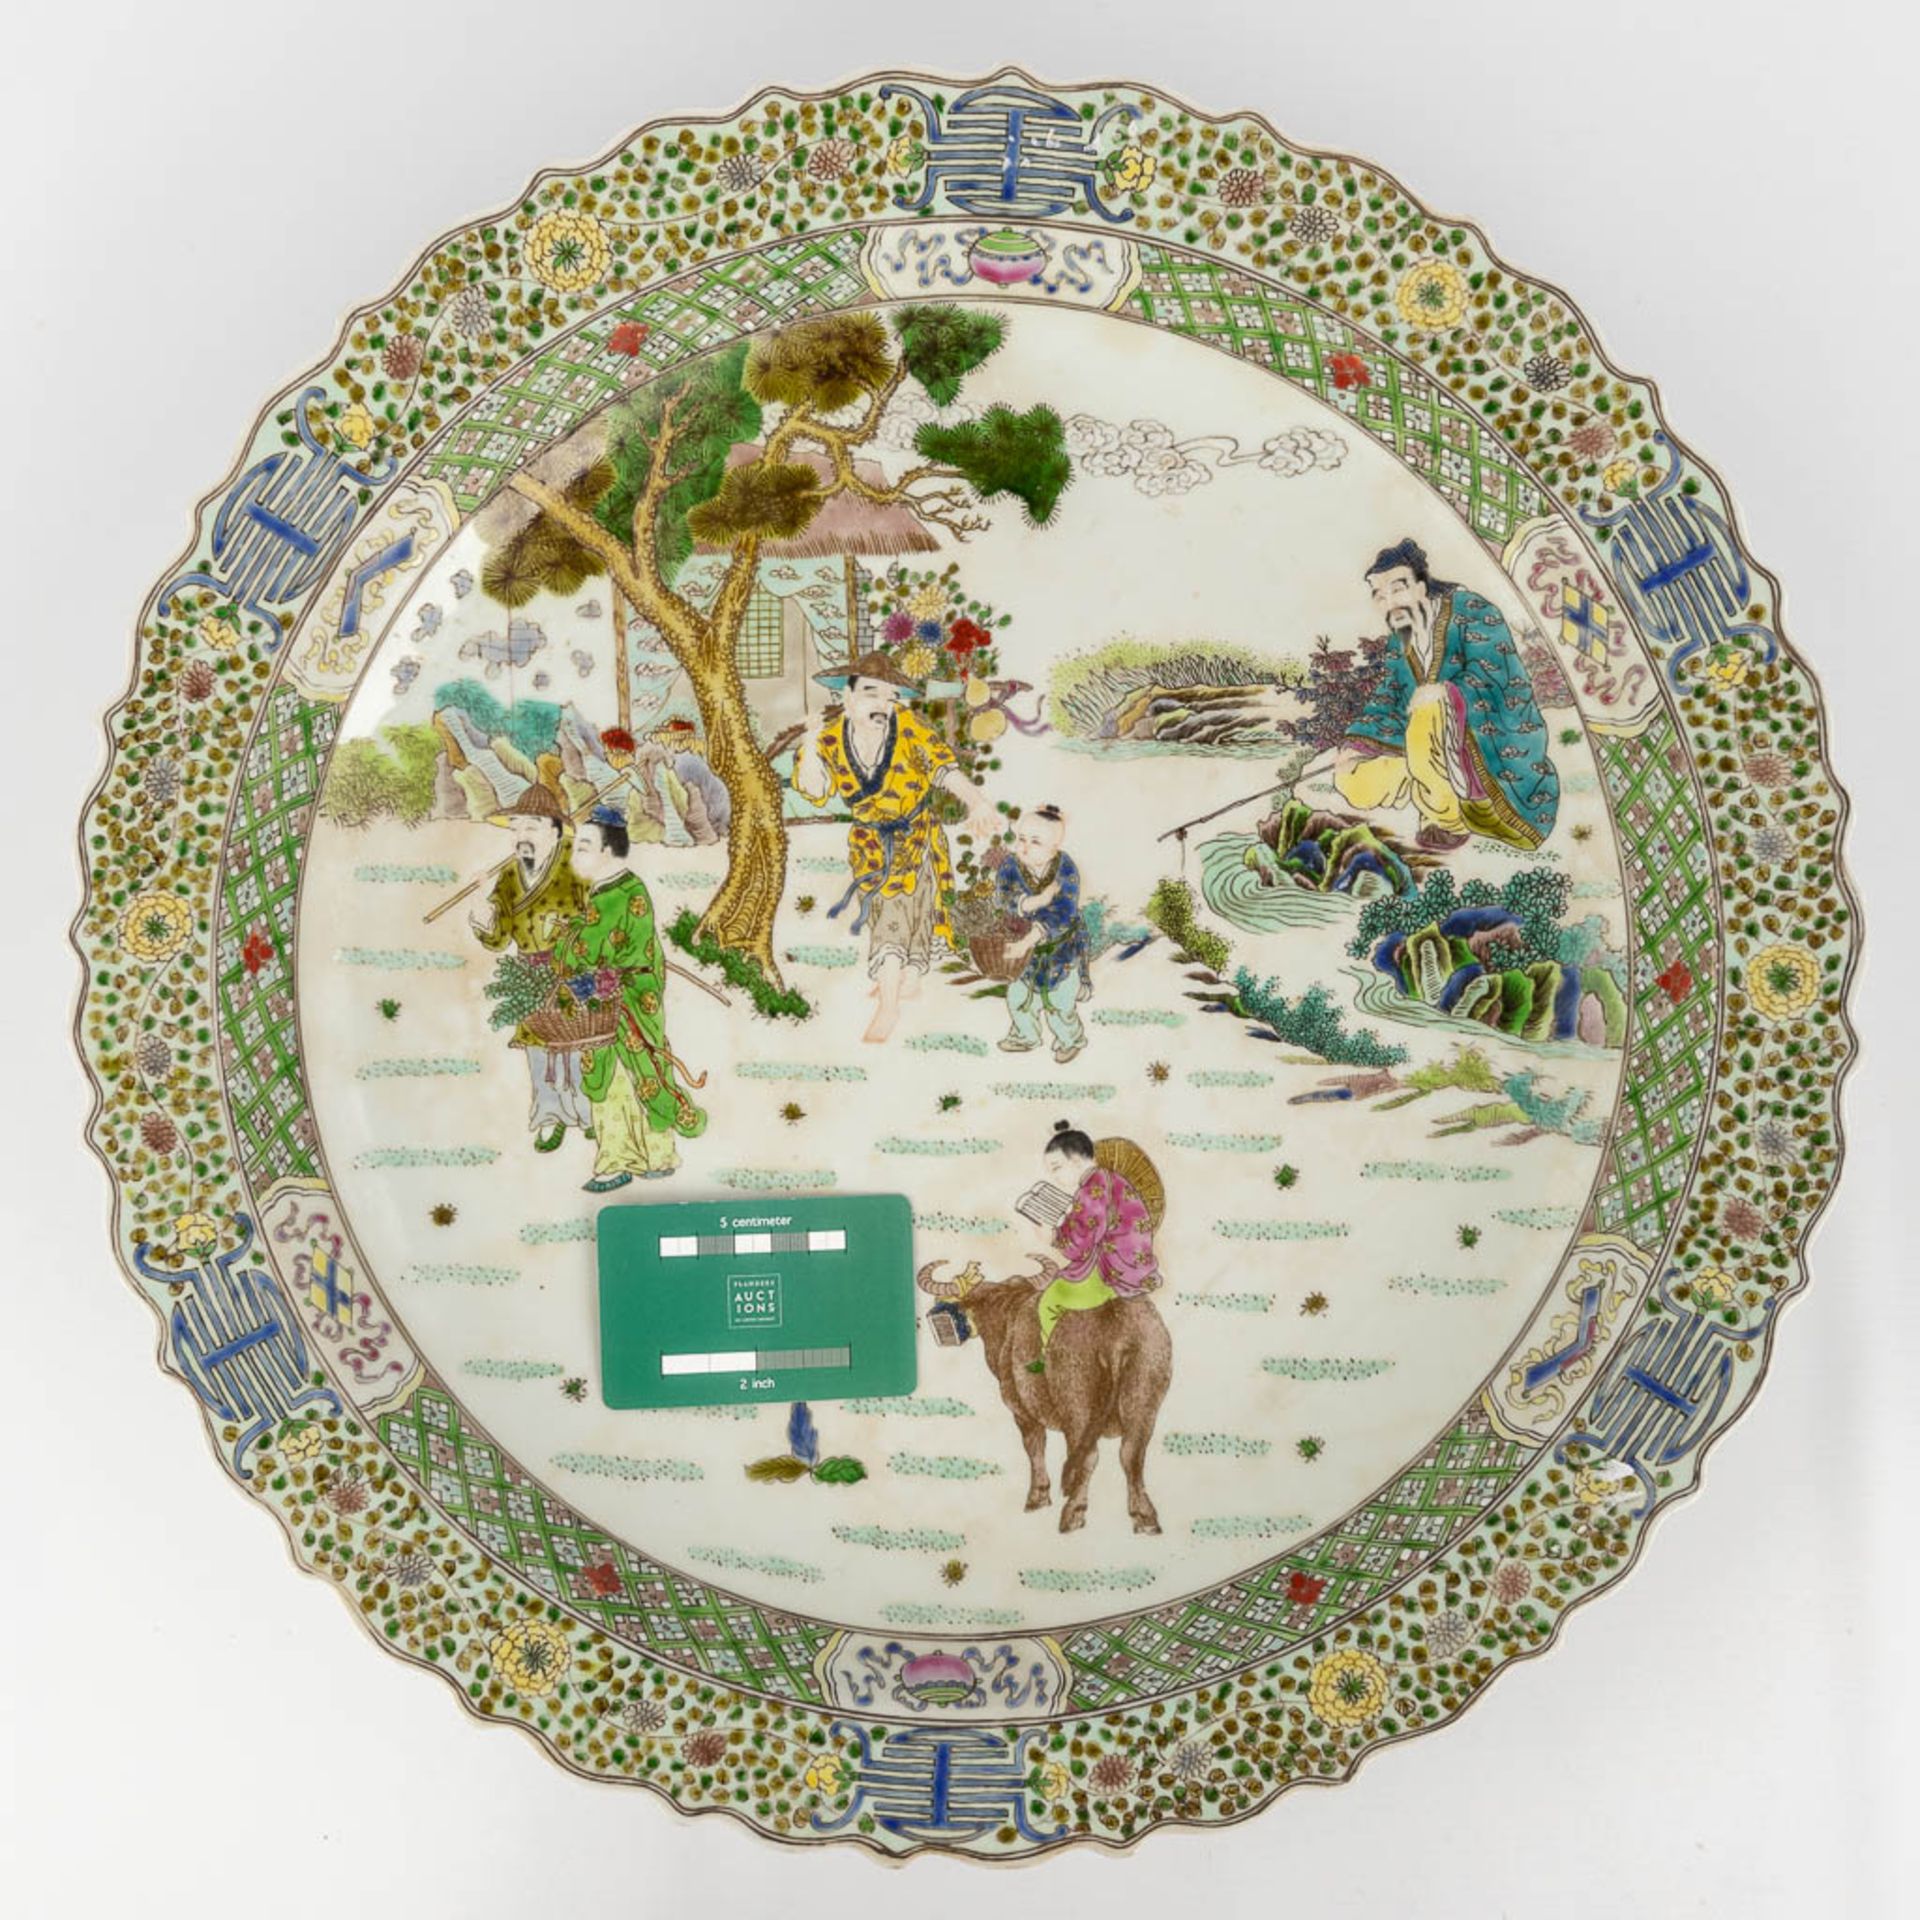 A Chinese plate 'Famille Verte' decorated with Chinese figurines. 20th C. Kangxi mark. (D: 45 cm) - Image 2 of 10